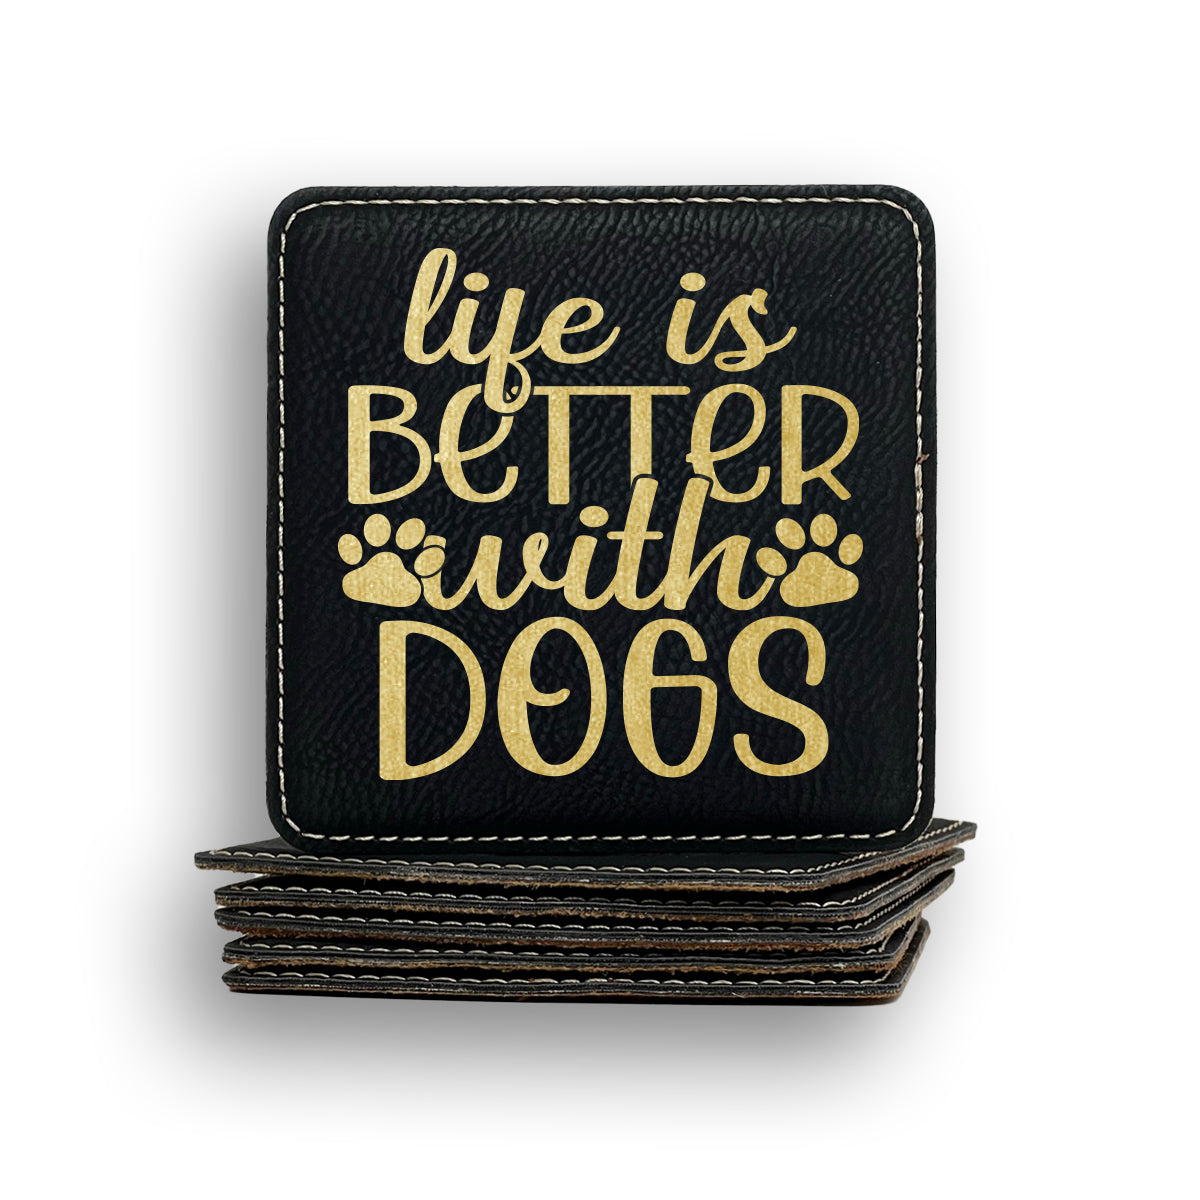 Life Better Dogs Coaster